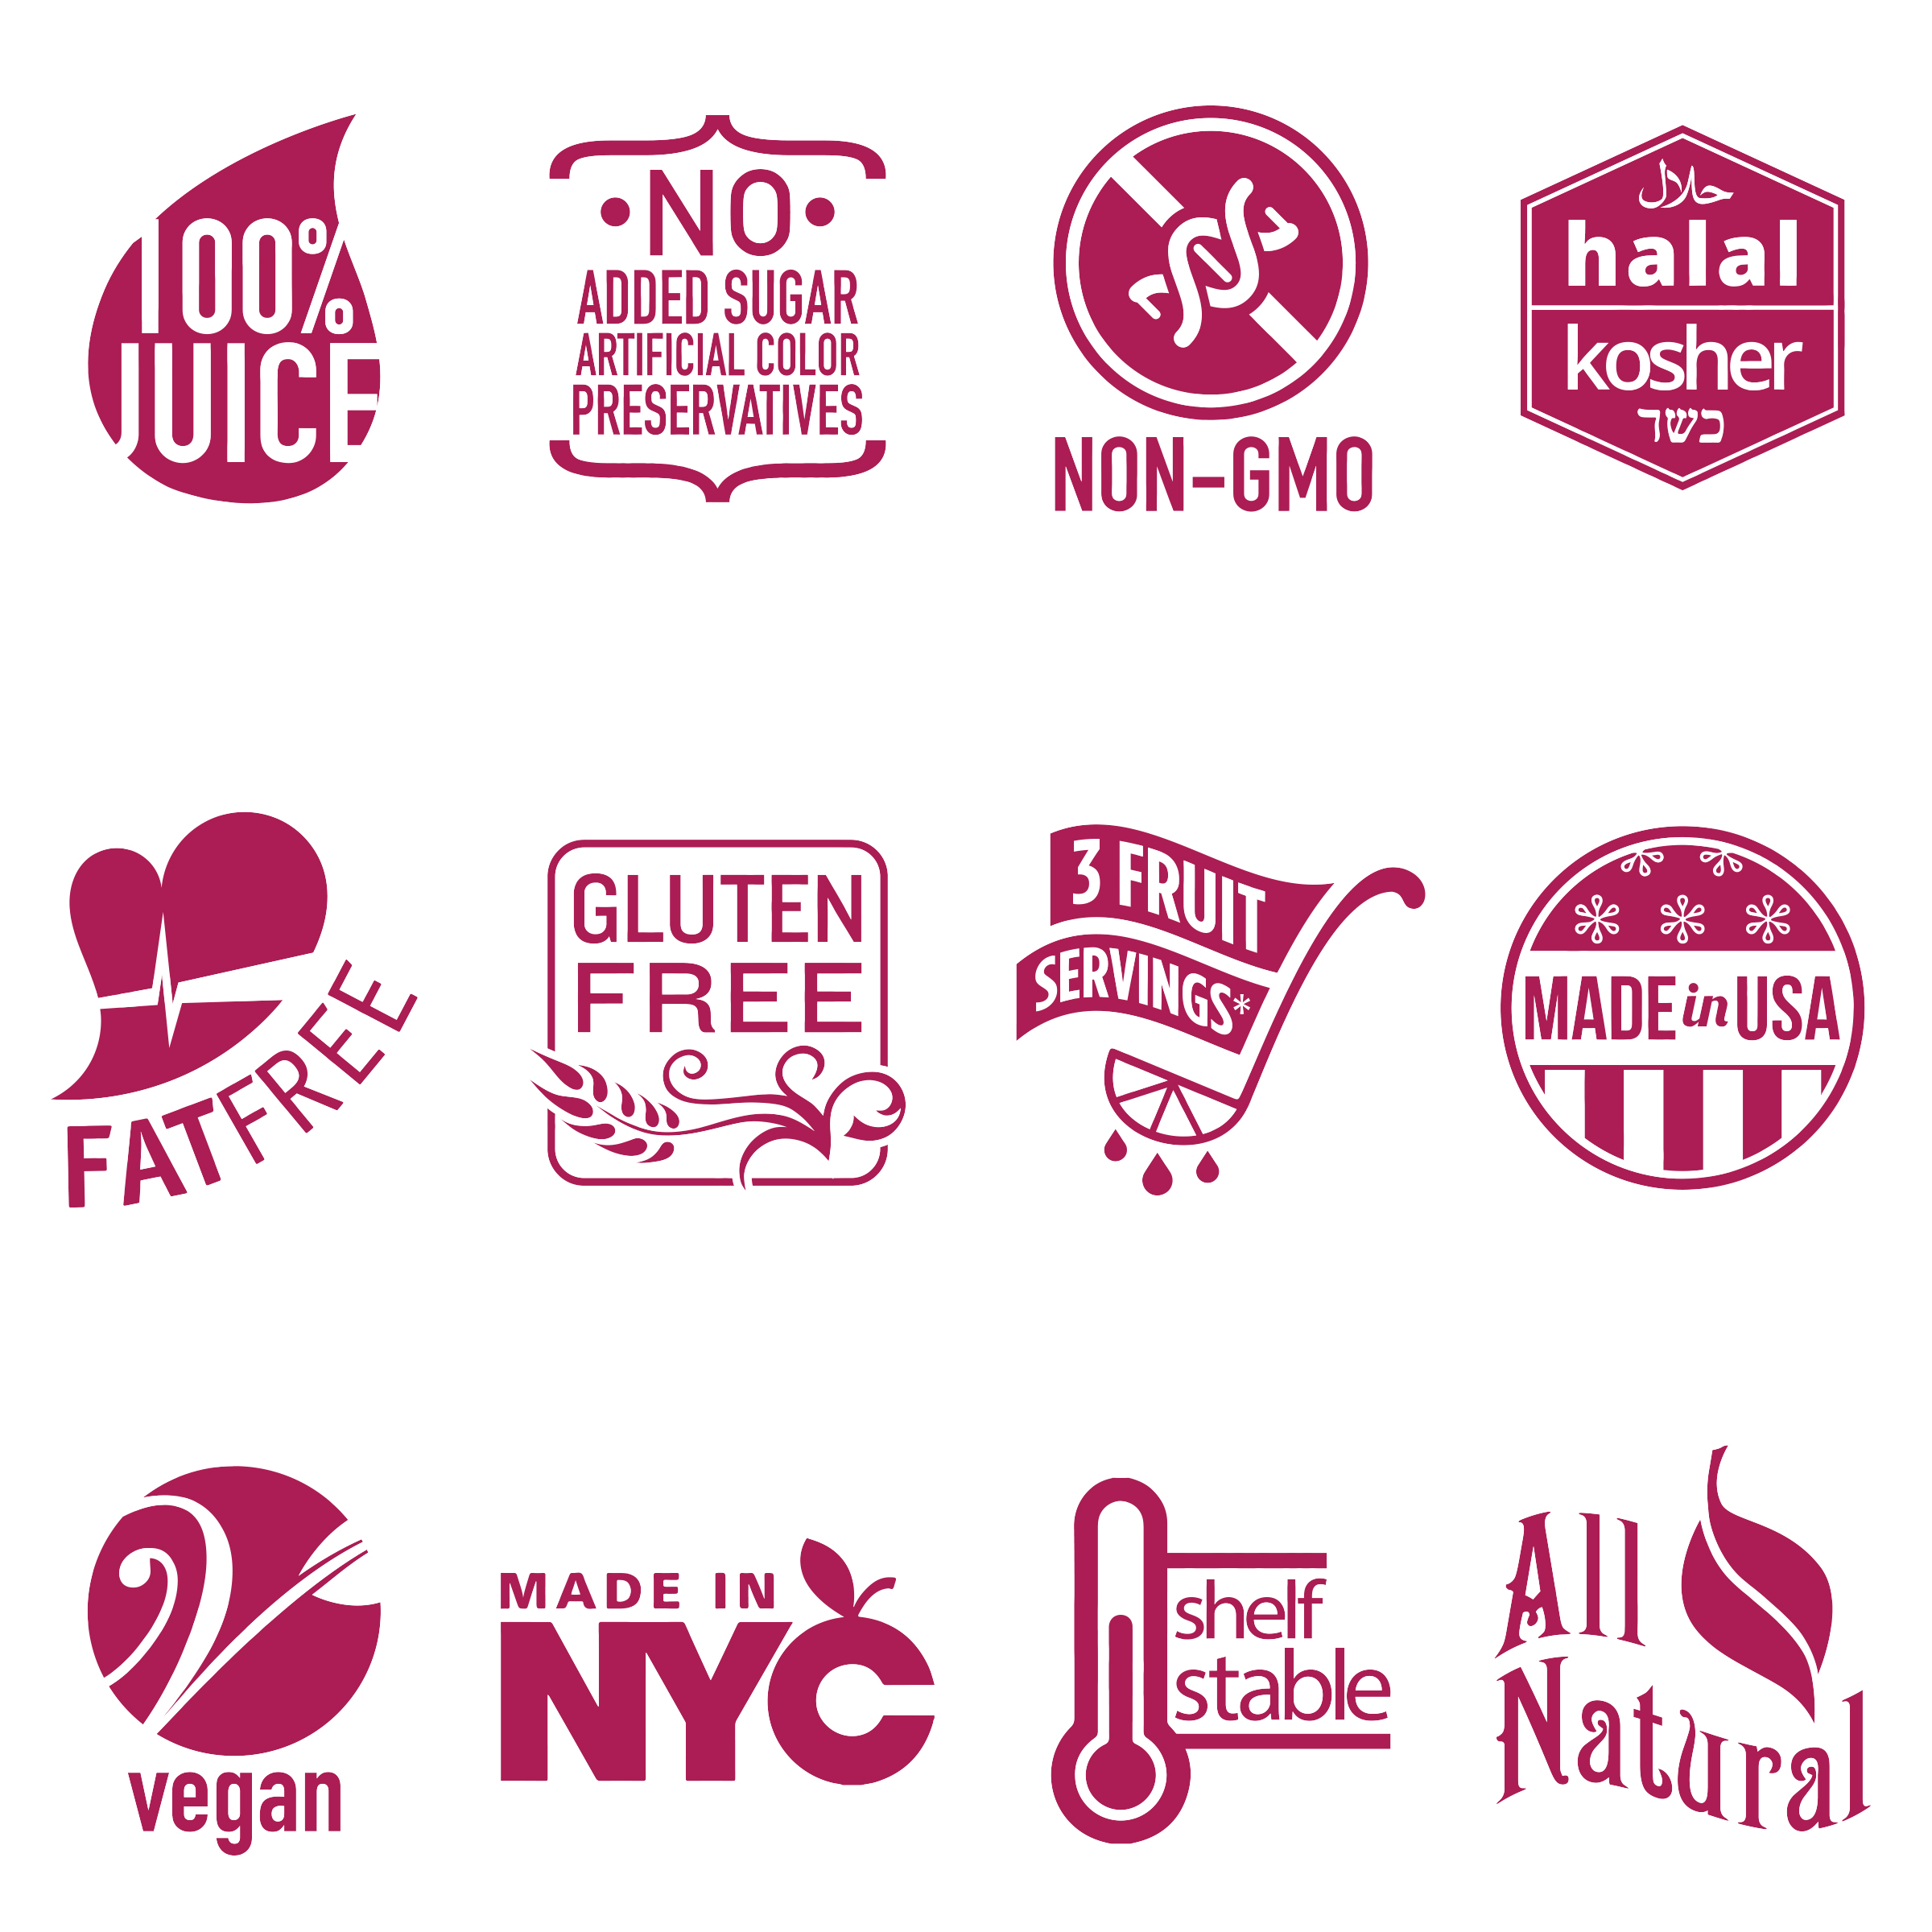 Smoothie Juice Distributors with Kosher, Non-GMO, Vegan, and Gluten-free Products